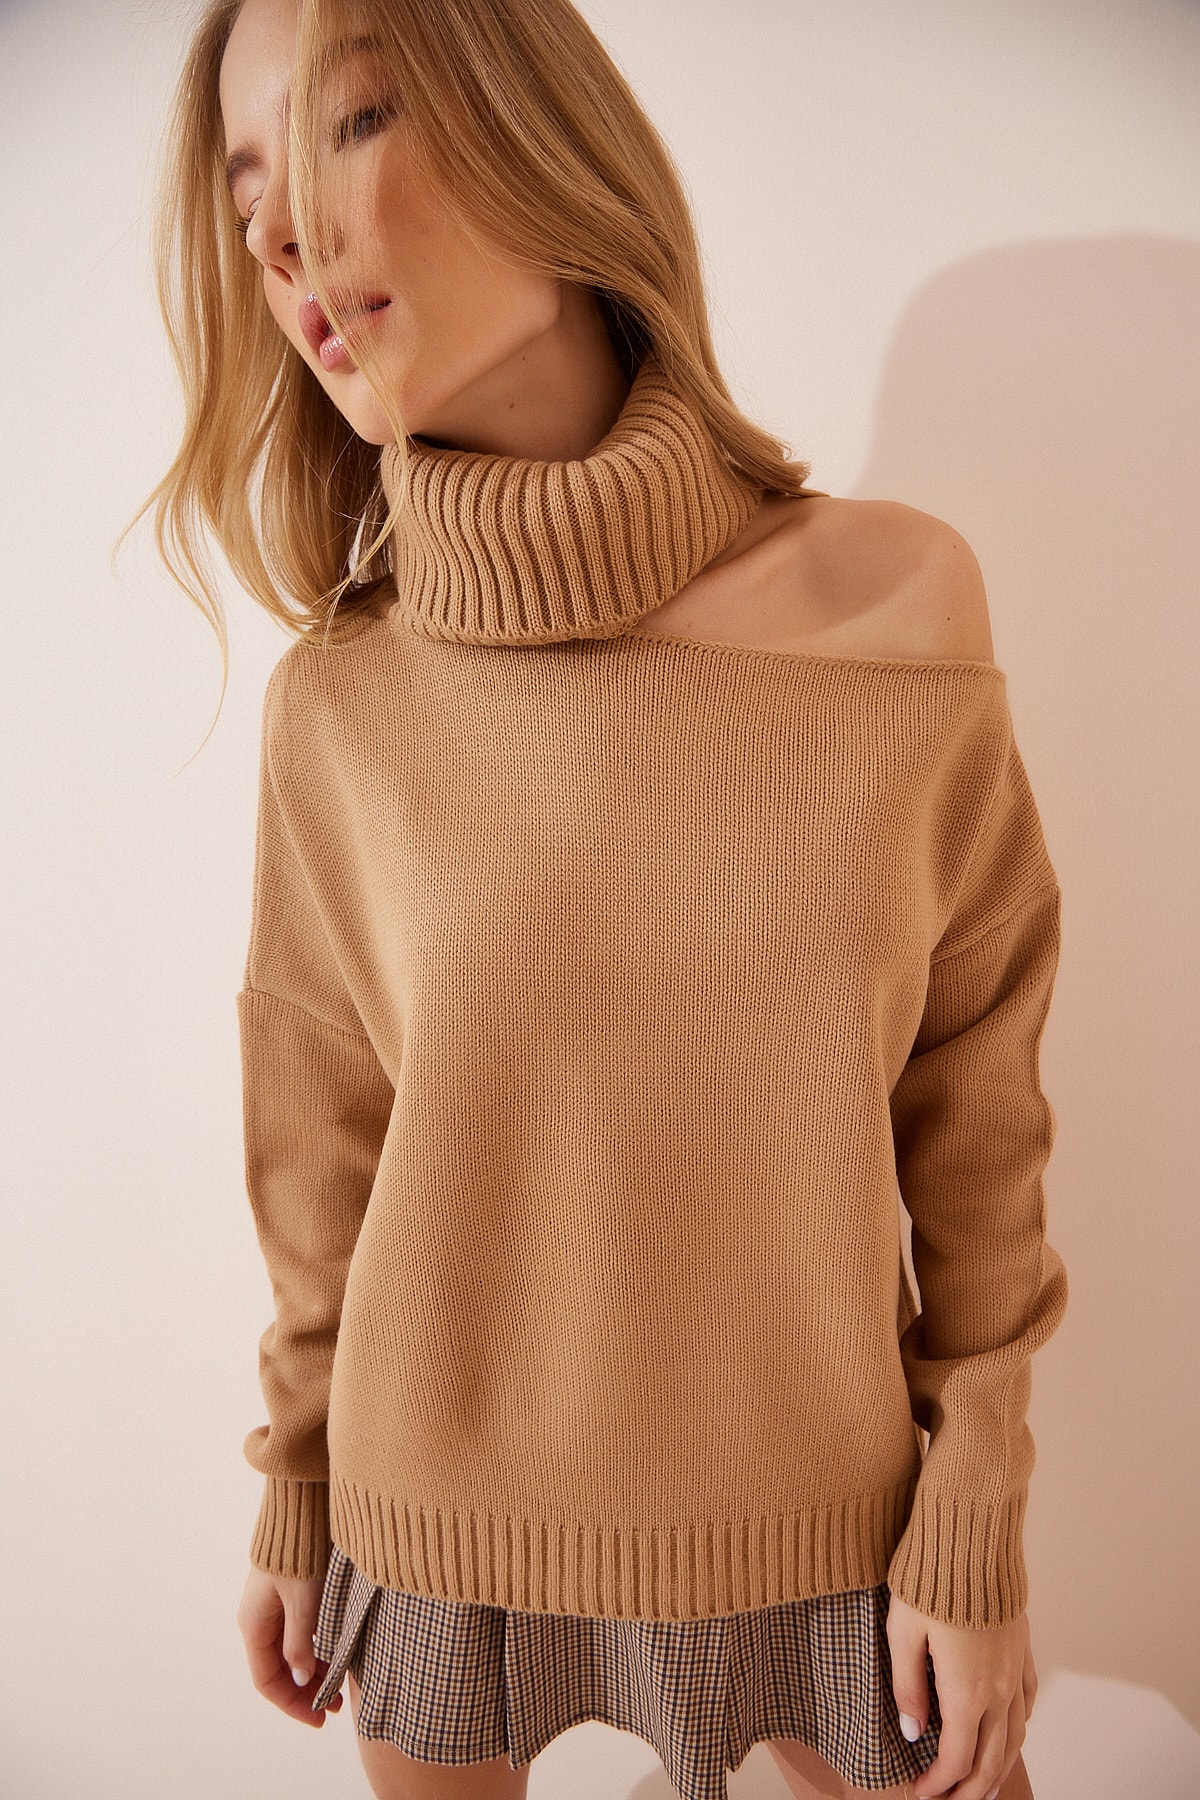 Levně Happiness İstanbul Women's Biscuit Cot Out Detailed Turtleneck Knitwear Sweater